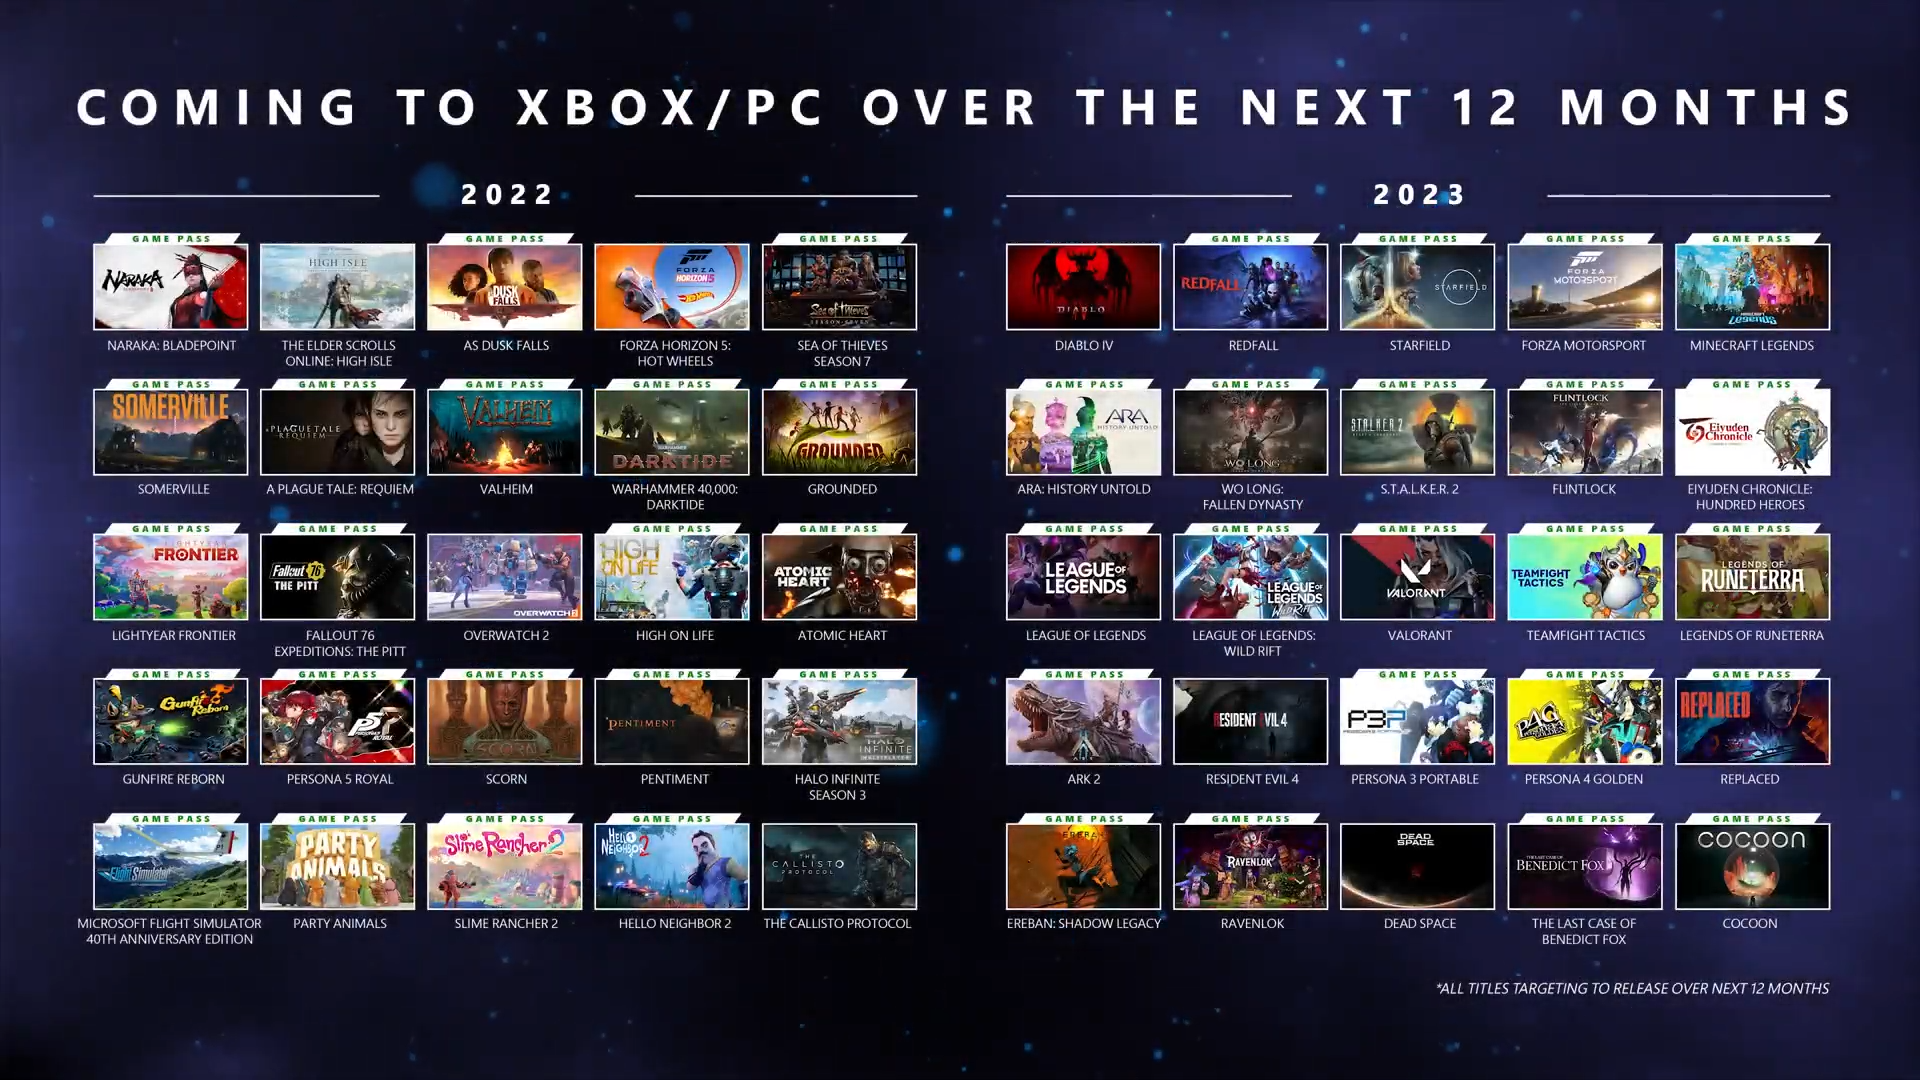 Grid image of all of the games coming Xbox Game Pass in the next 12 months